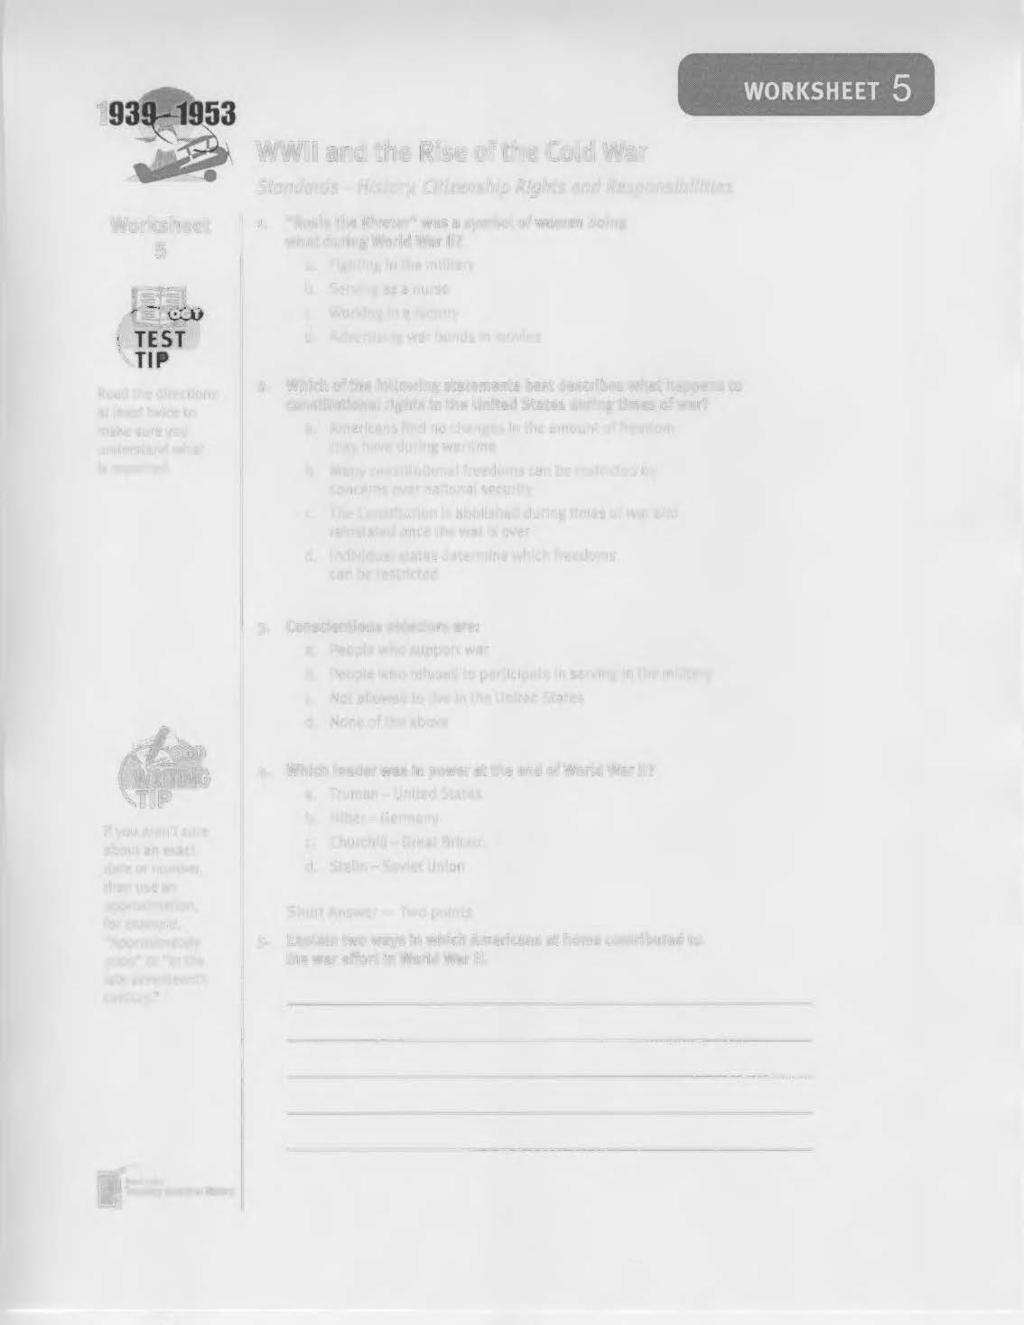 Standards - History, Citizenship Rights and Responsibilities Worksheet 5 1. "Rosie the Riveter" was a symbol of women doing what during World War II? a. Fighting in the military b.